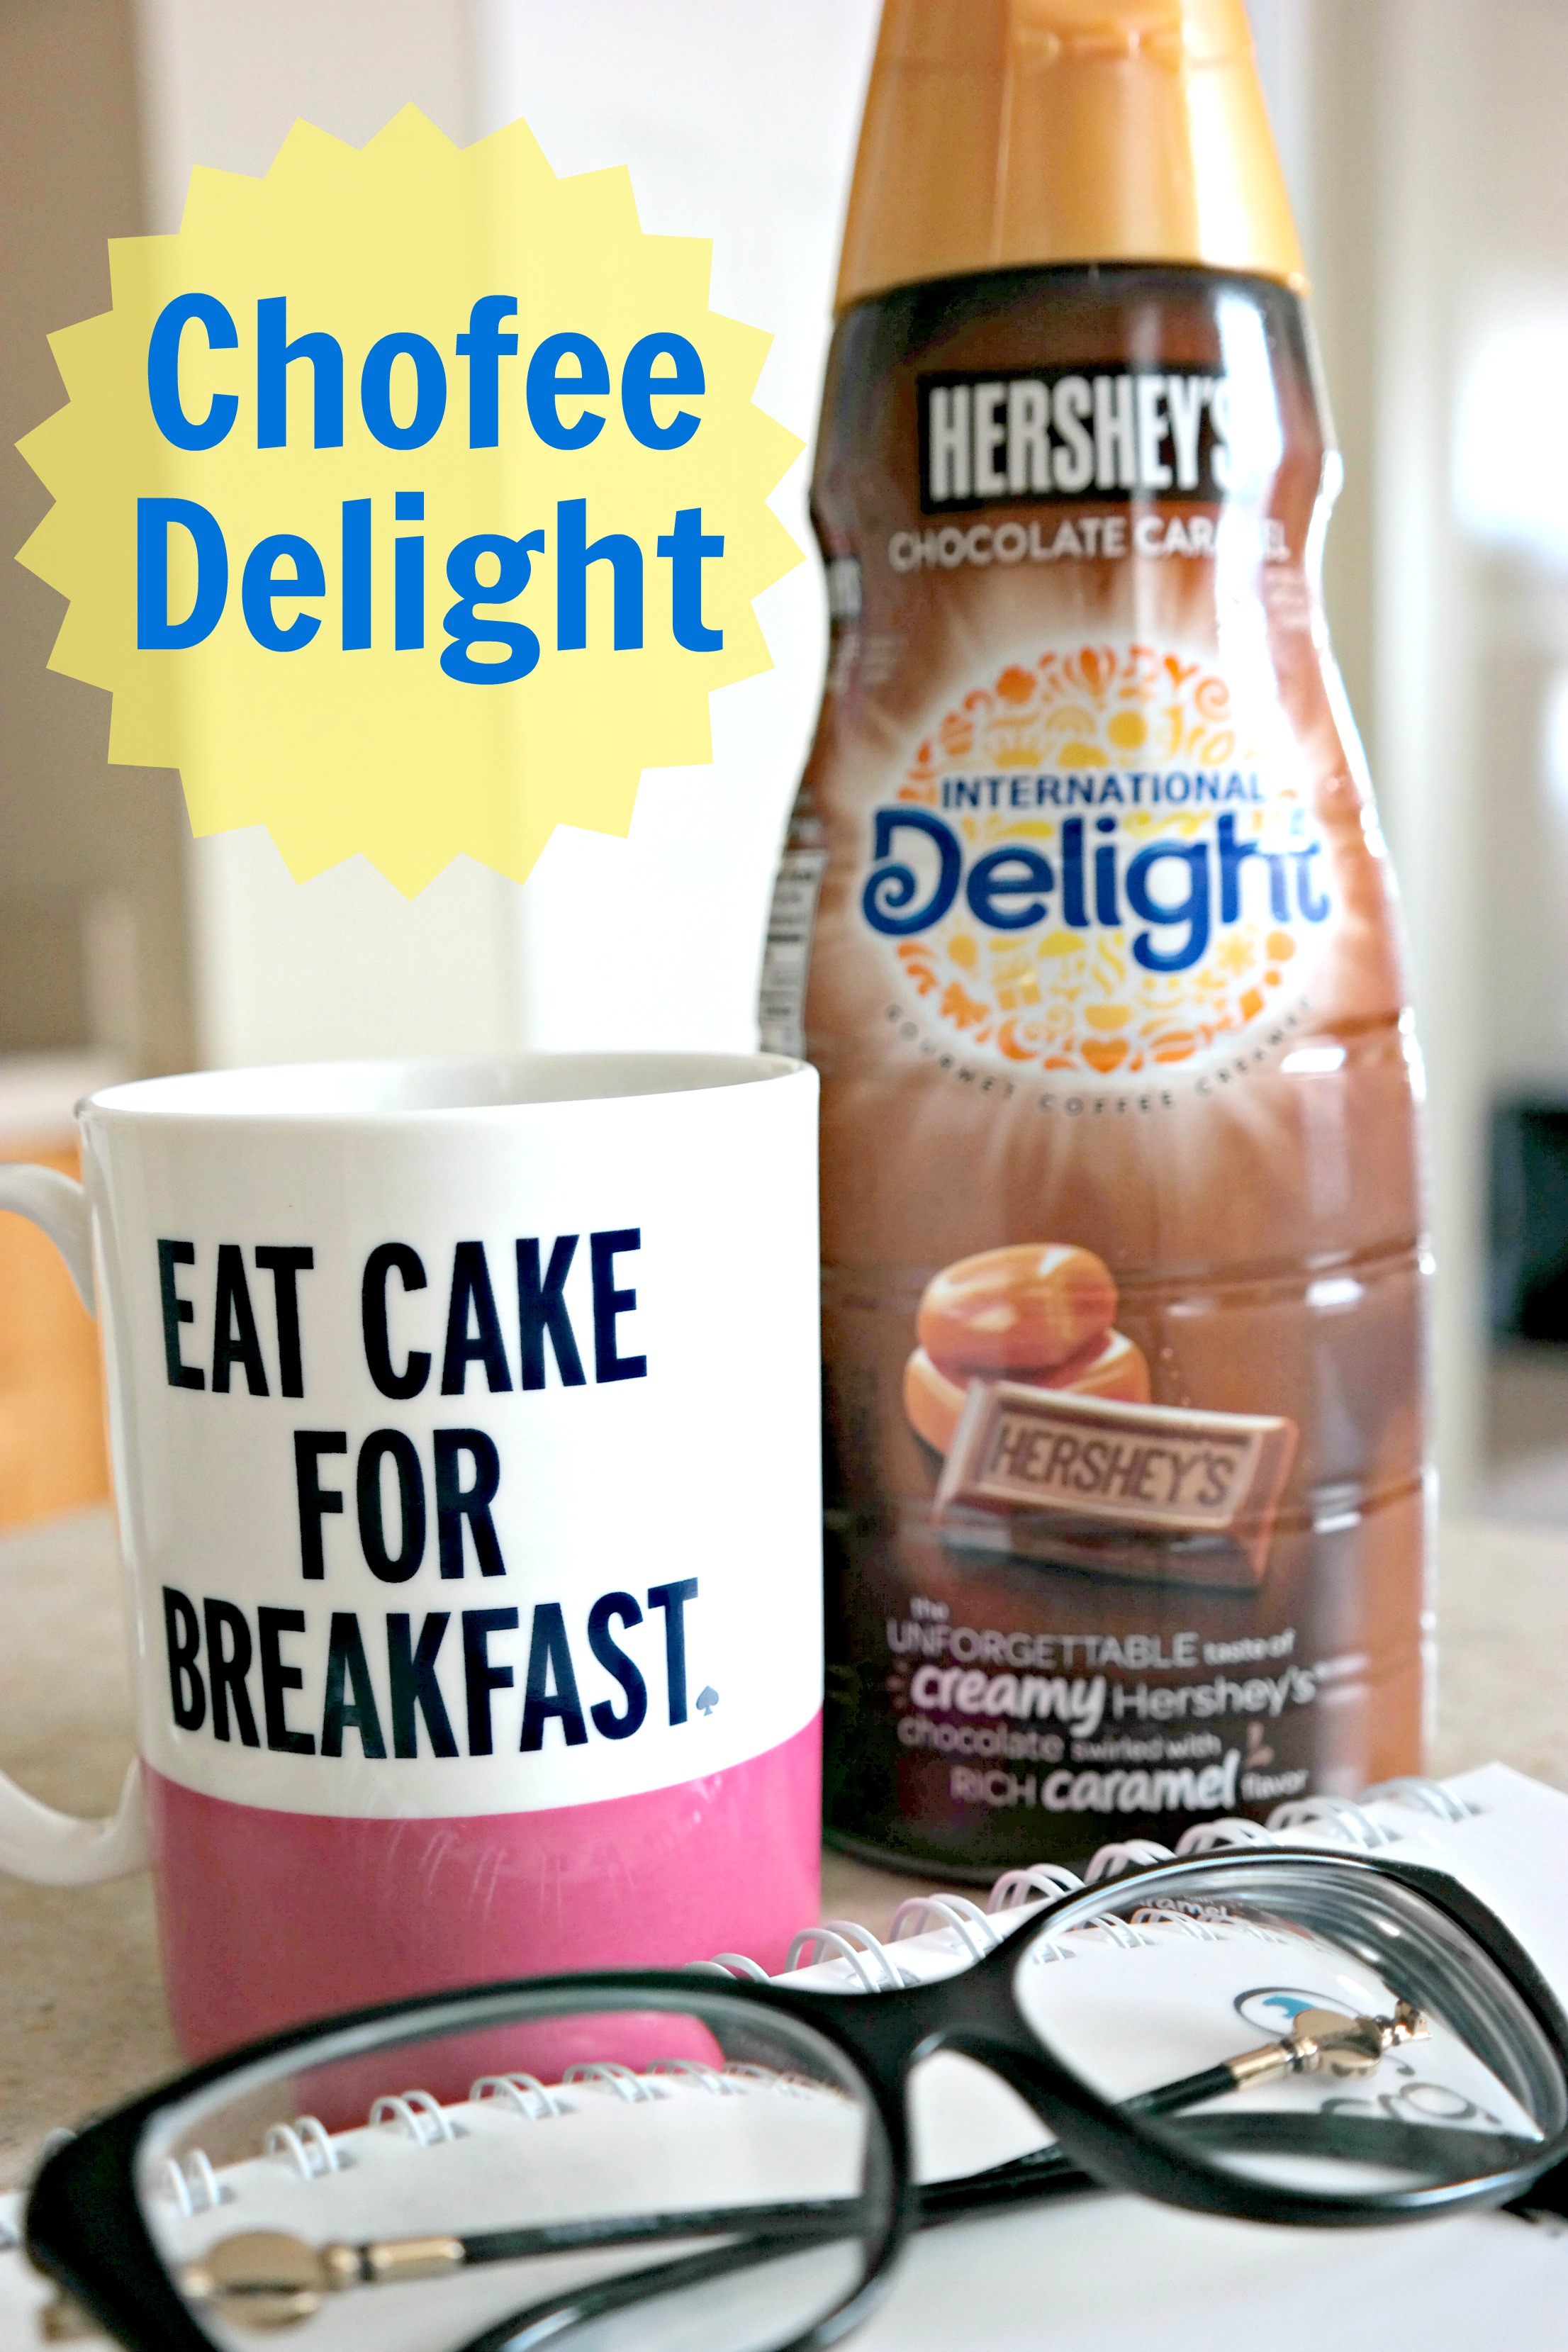 If you're looking for a new drink in the new year, may I introduce you to chofee?! #IDelight